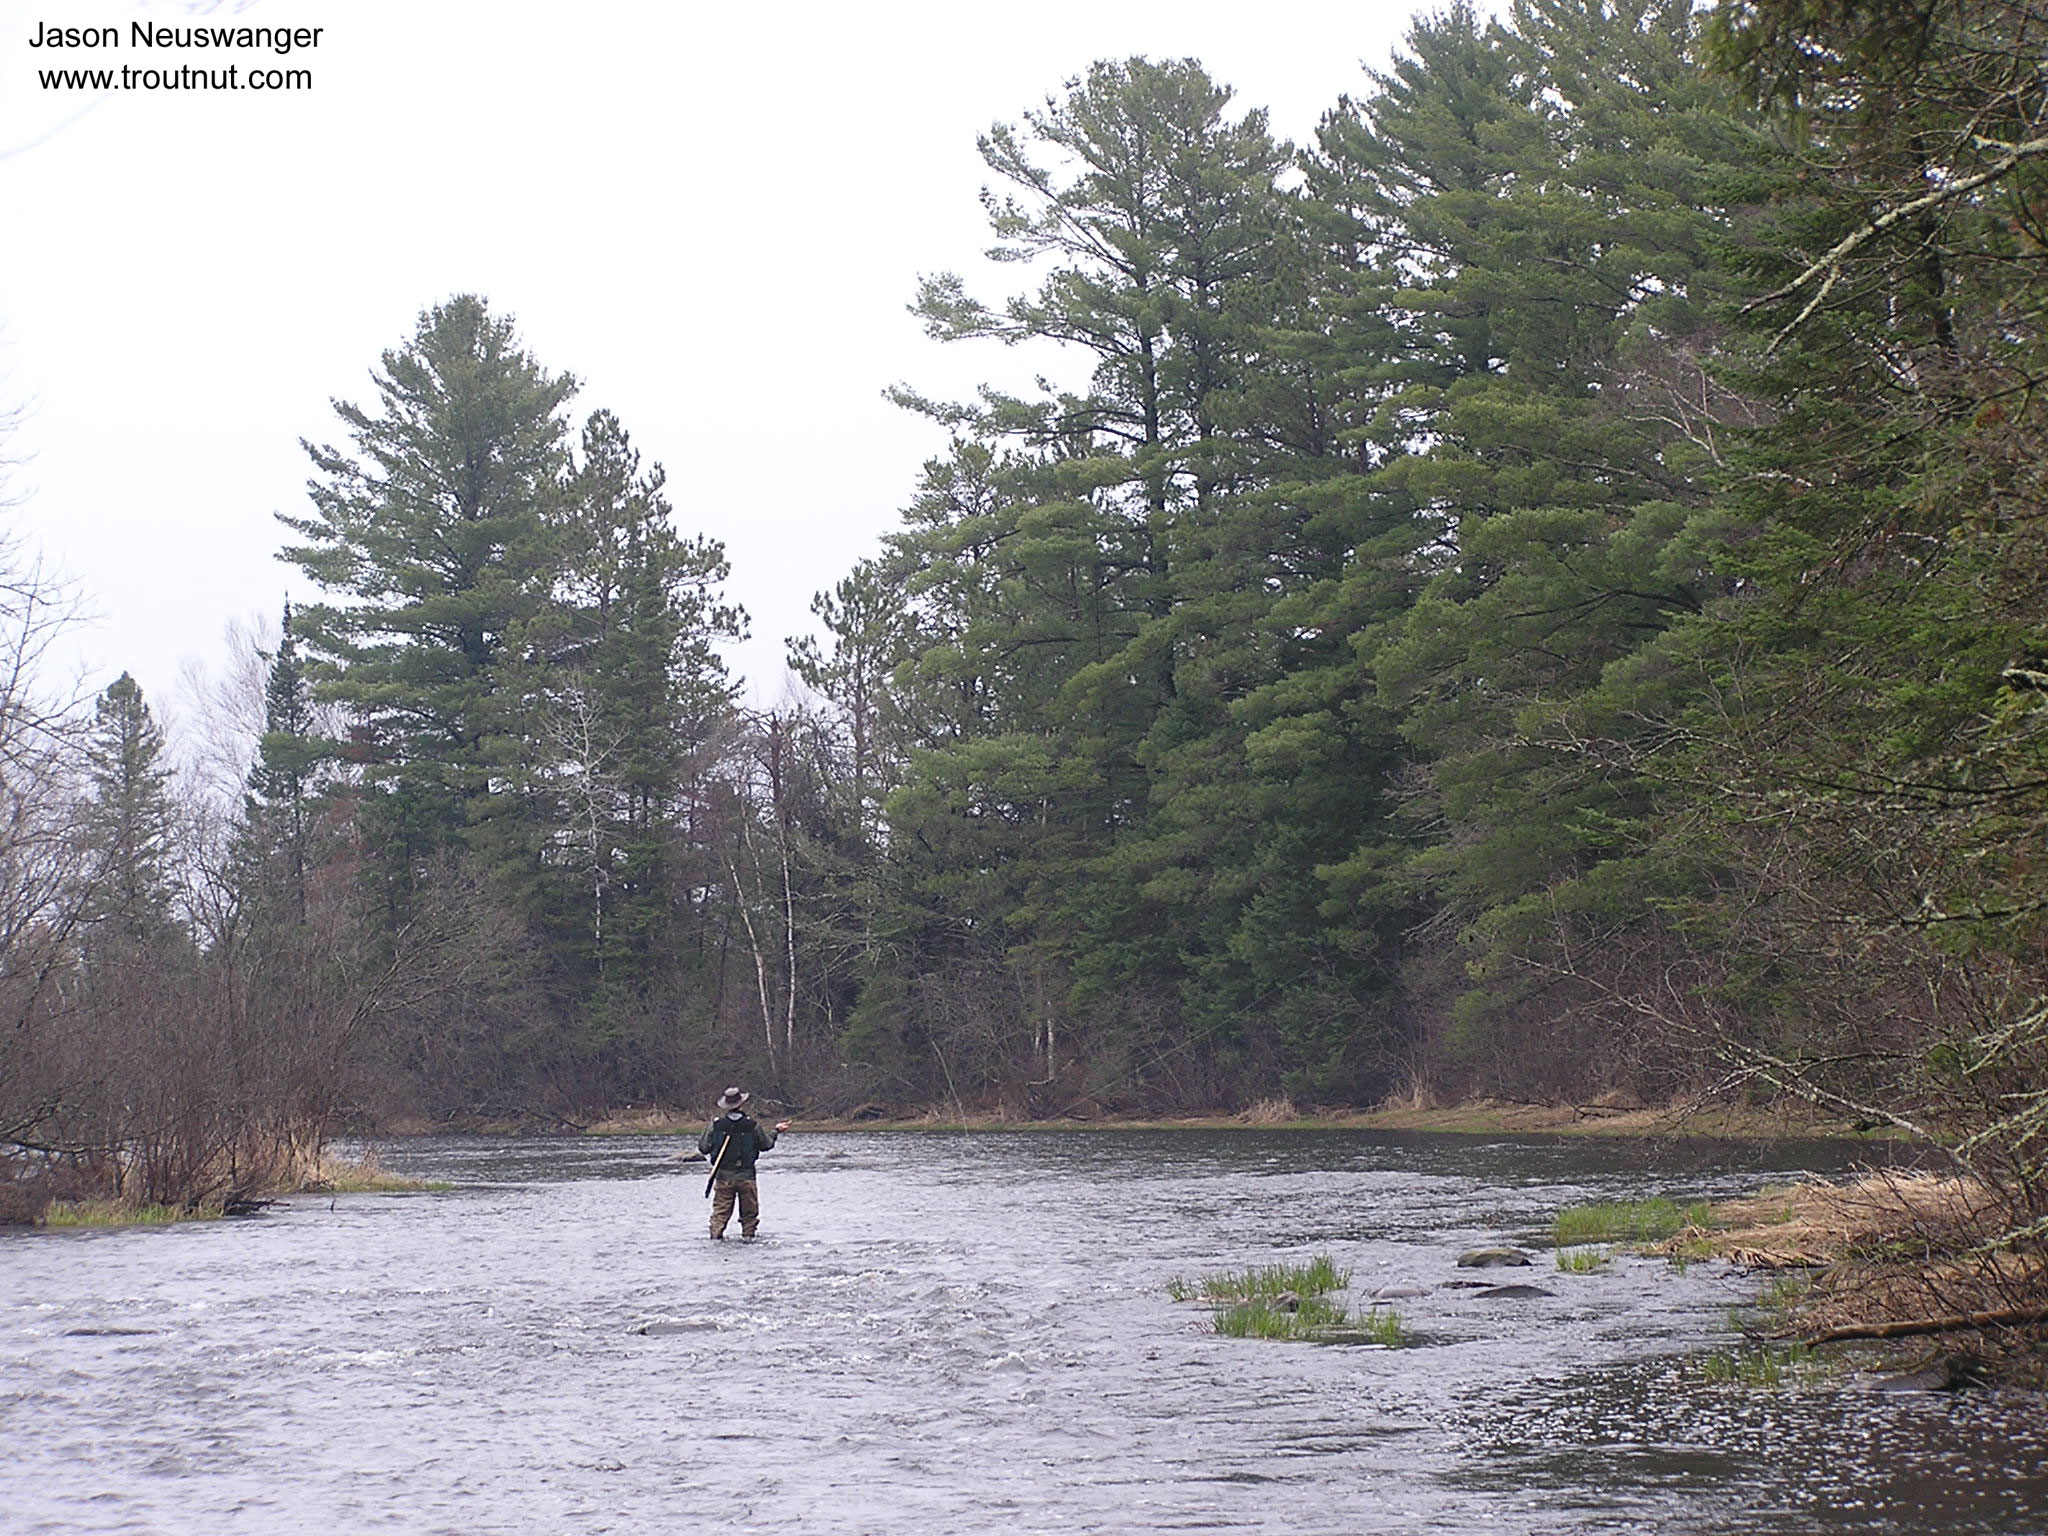 I'm in this picture casing into the riffle above one of my favorite pools.  The fishing was fine, but the catching wasn't so hot.  I got one strike on my carefully tied nymphs and two on my cheap foam strike indicator. From the Namekagon River in Wisconsin.